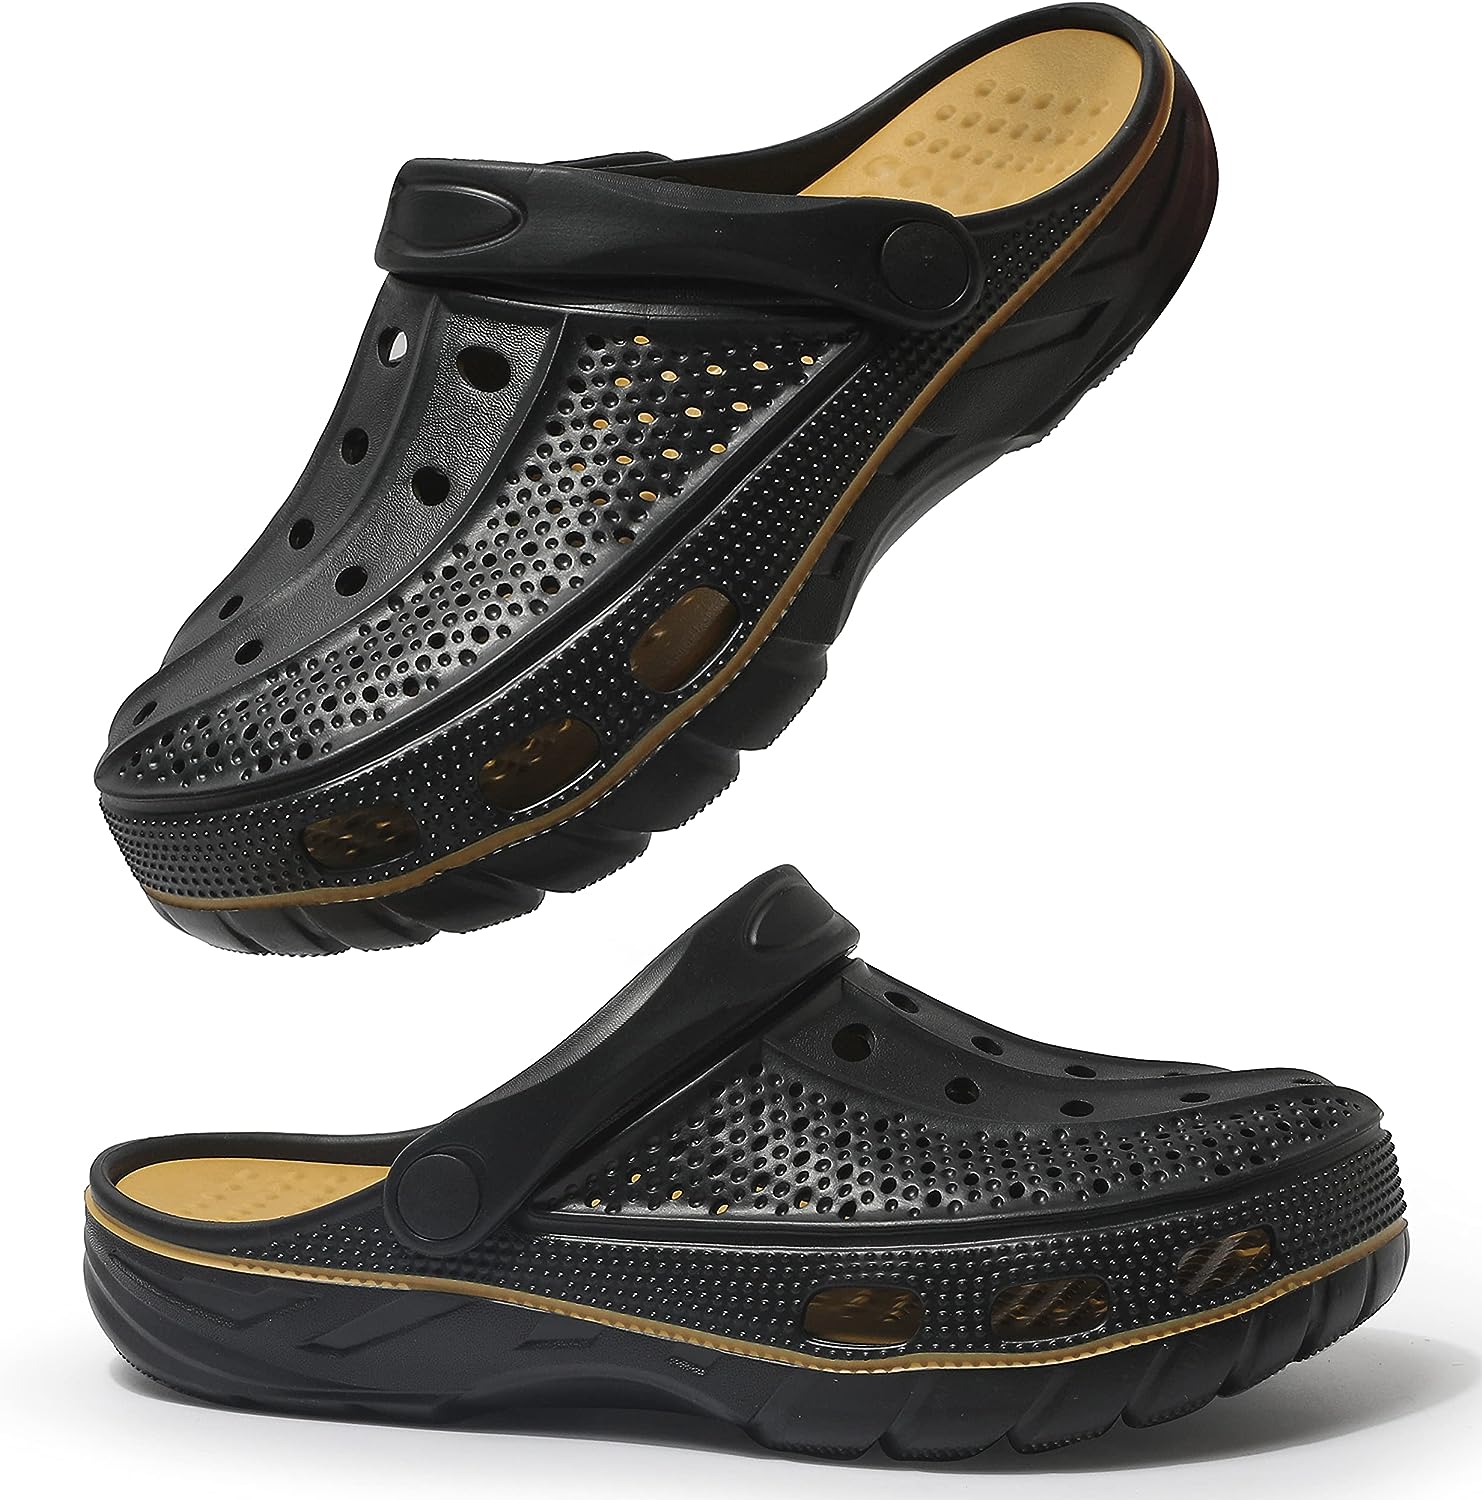 INMINPIN Women and Men Orthopedic Clogs Arch Support [...]